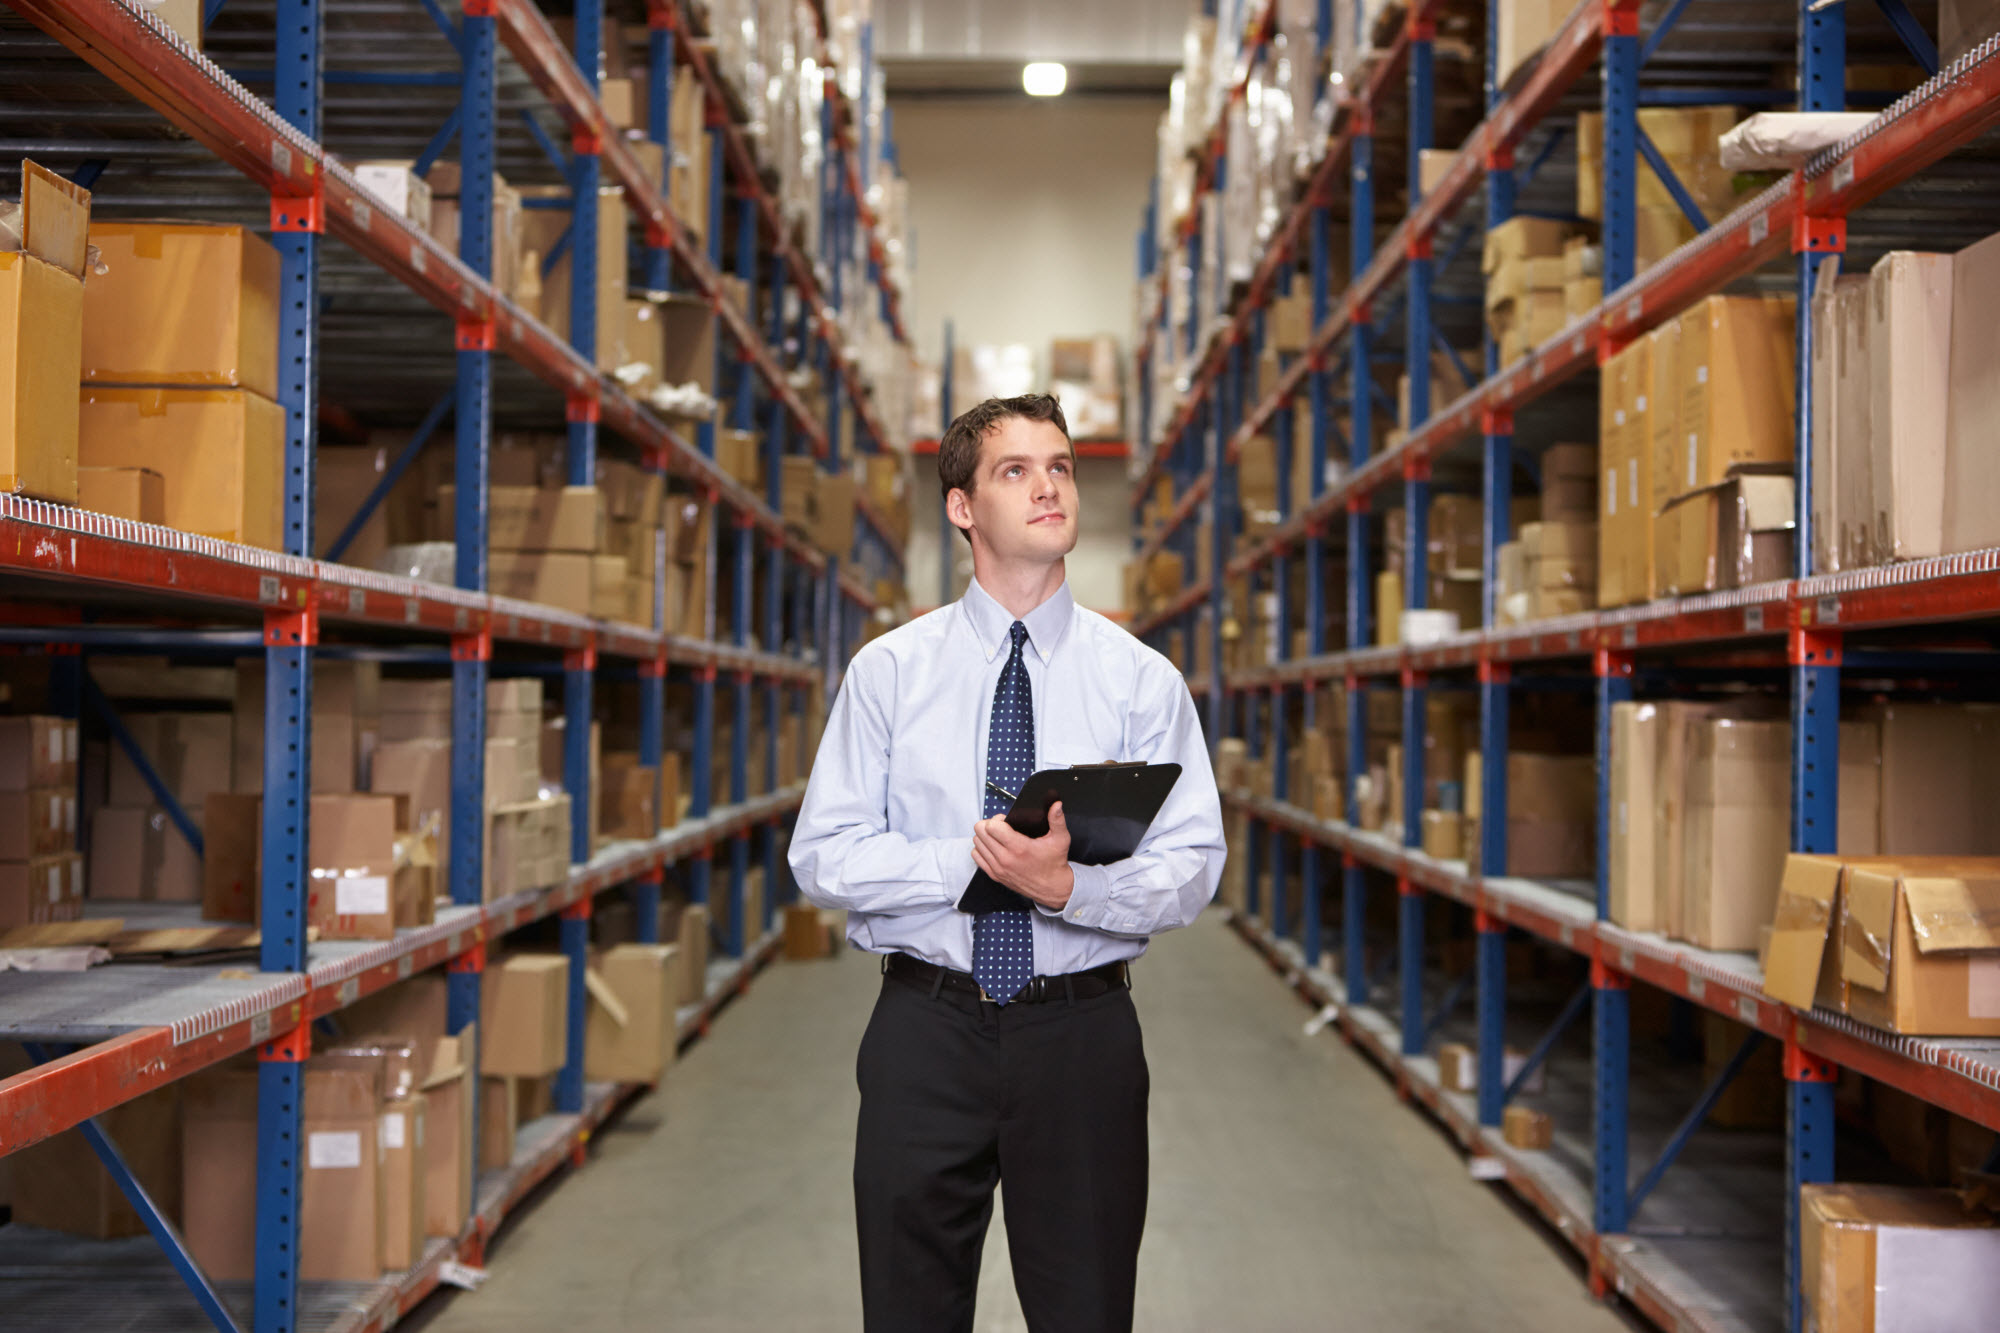 Warehouse Operation and Management